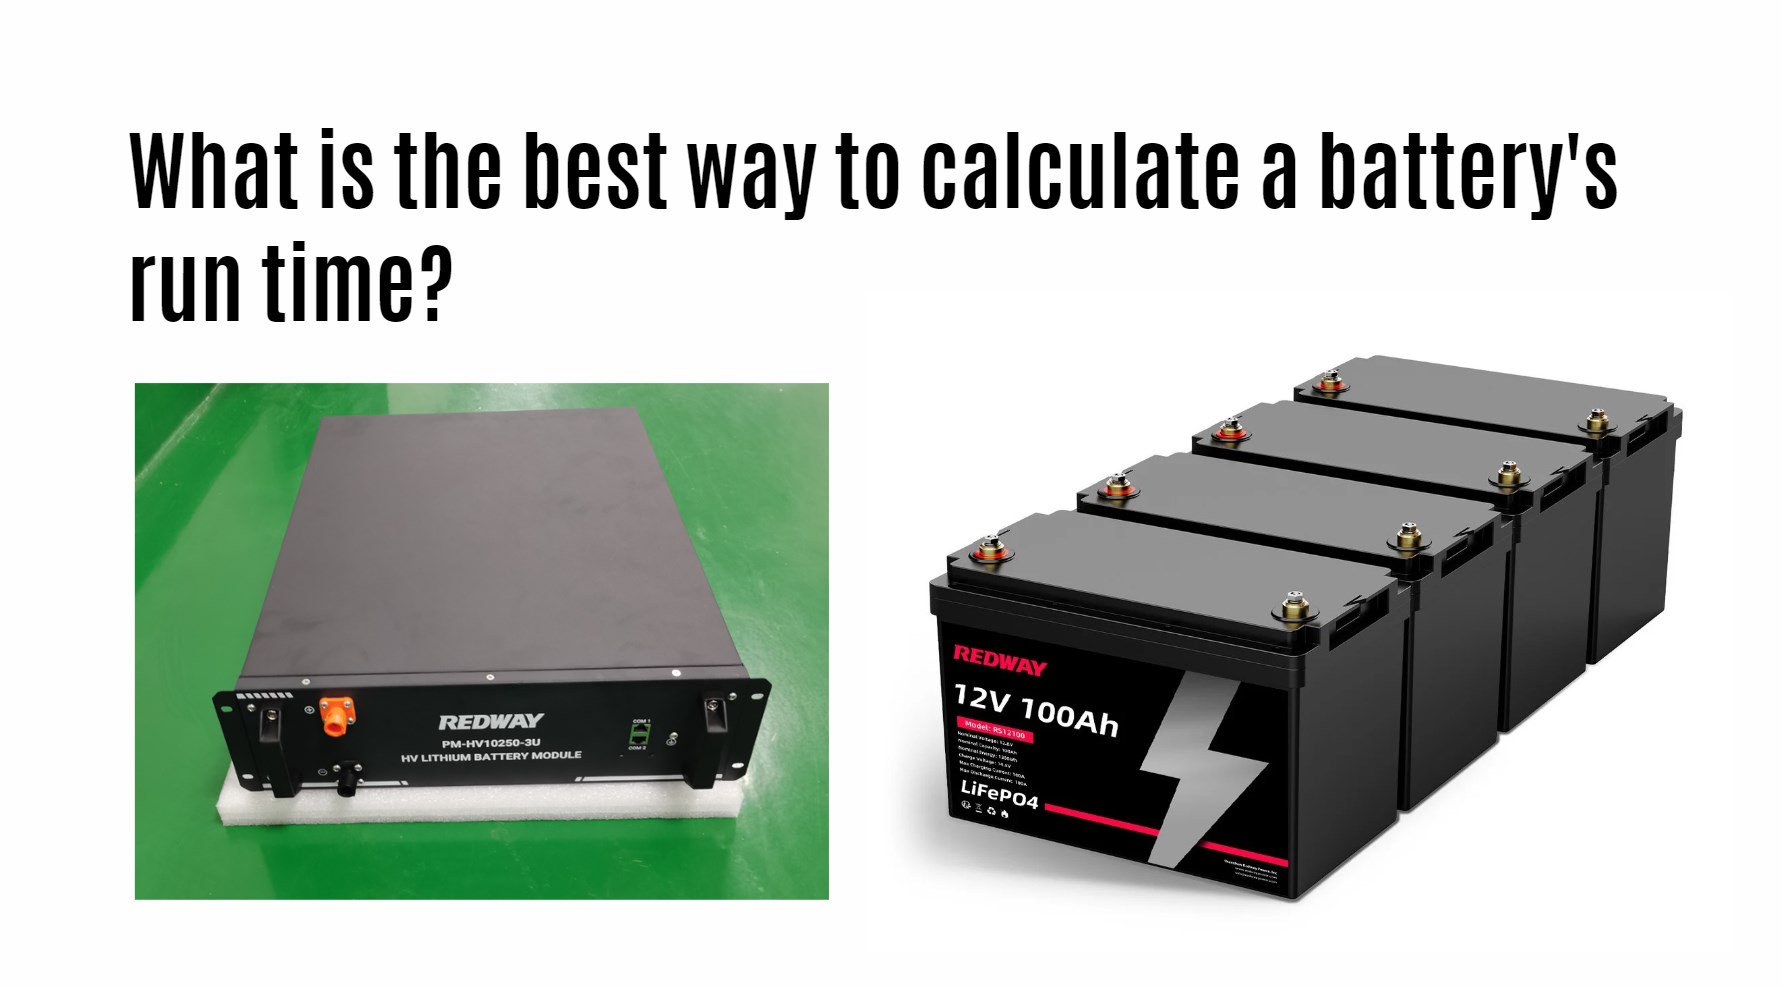 What is the best way to calculate a battery's run time?